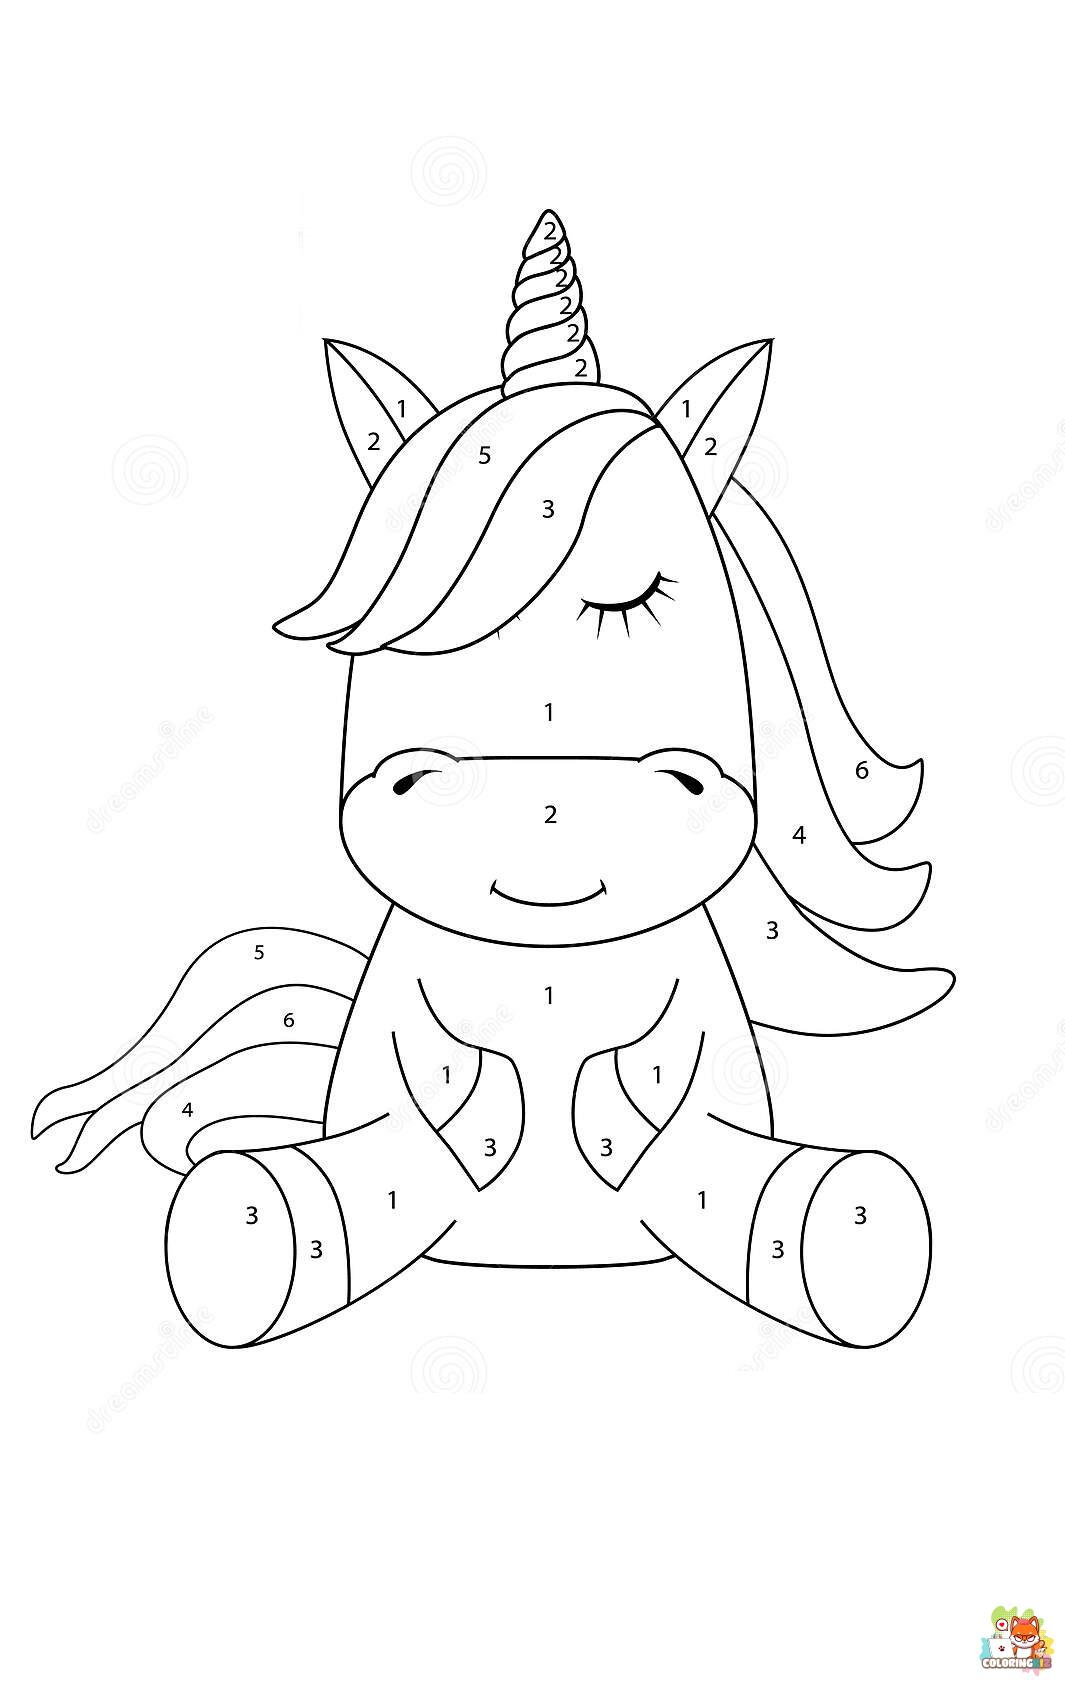 Cute Fat Unicorn Coloring Pages 5